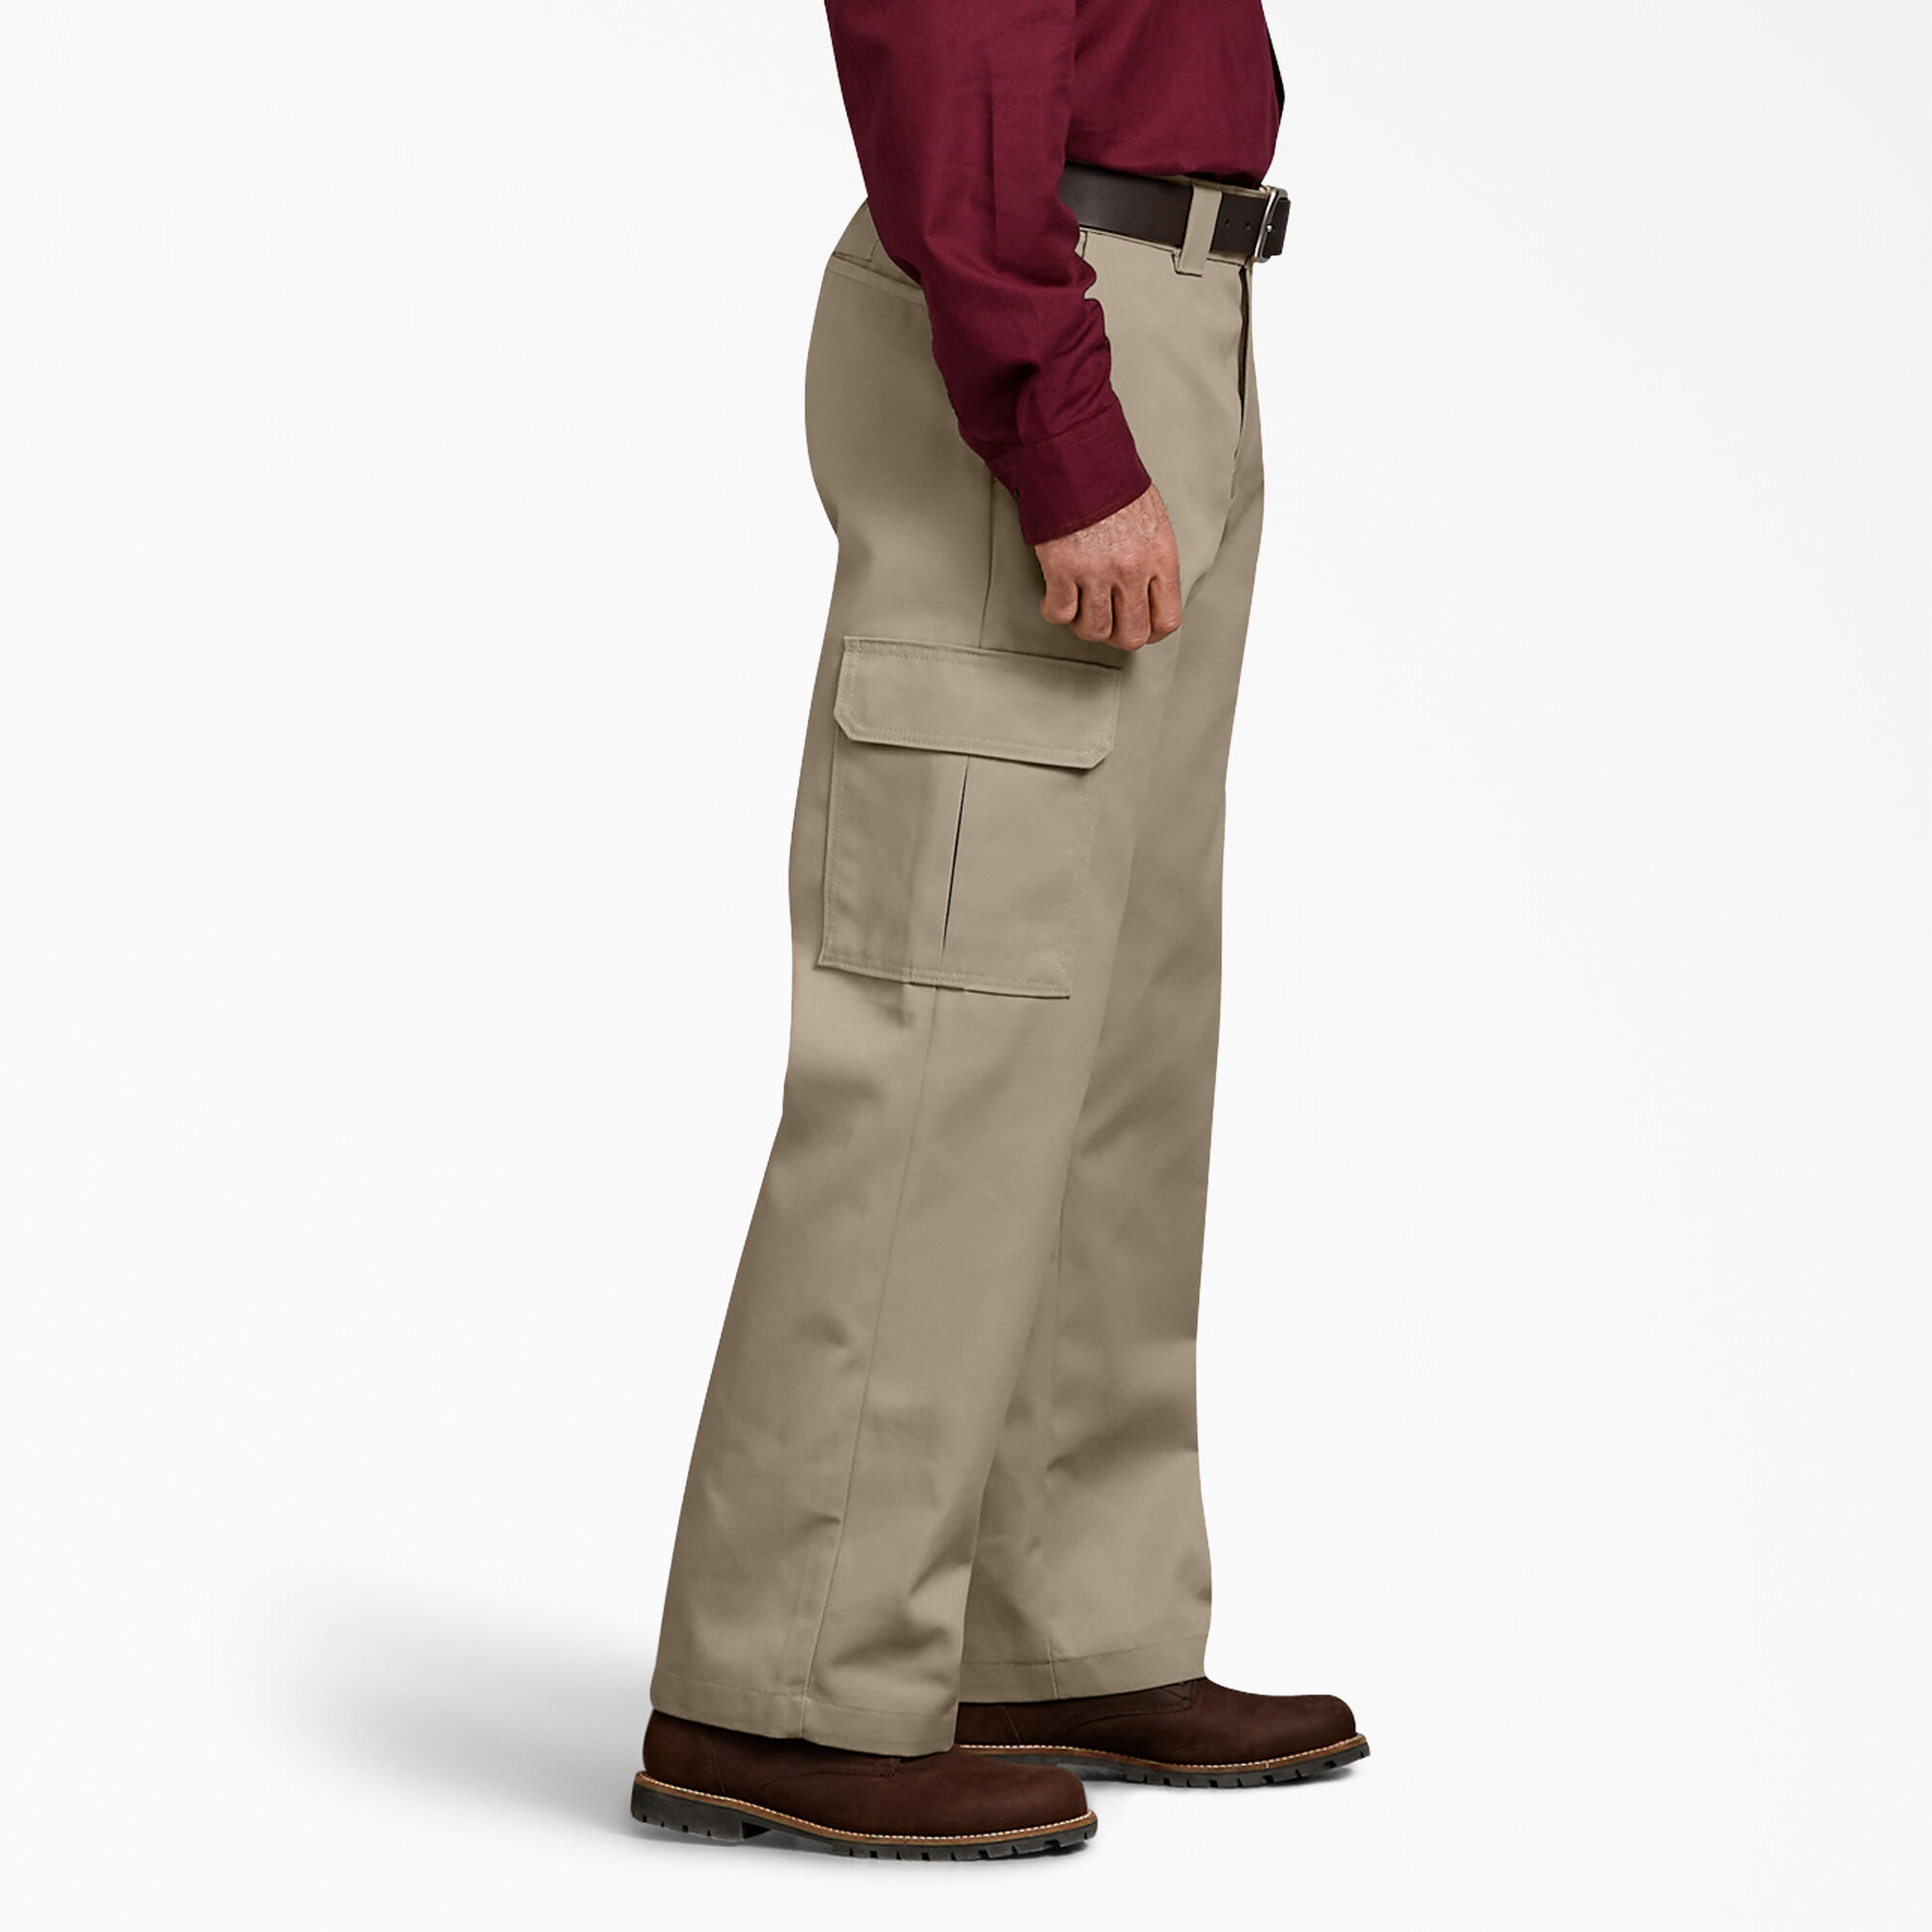 Relaxed Fit Straight Leg Cargo Work Pants | Men's Pants | Dickies